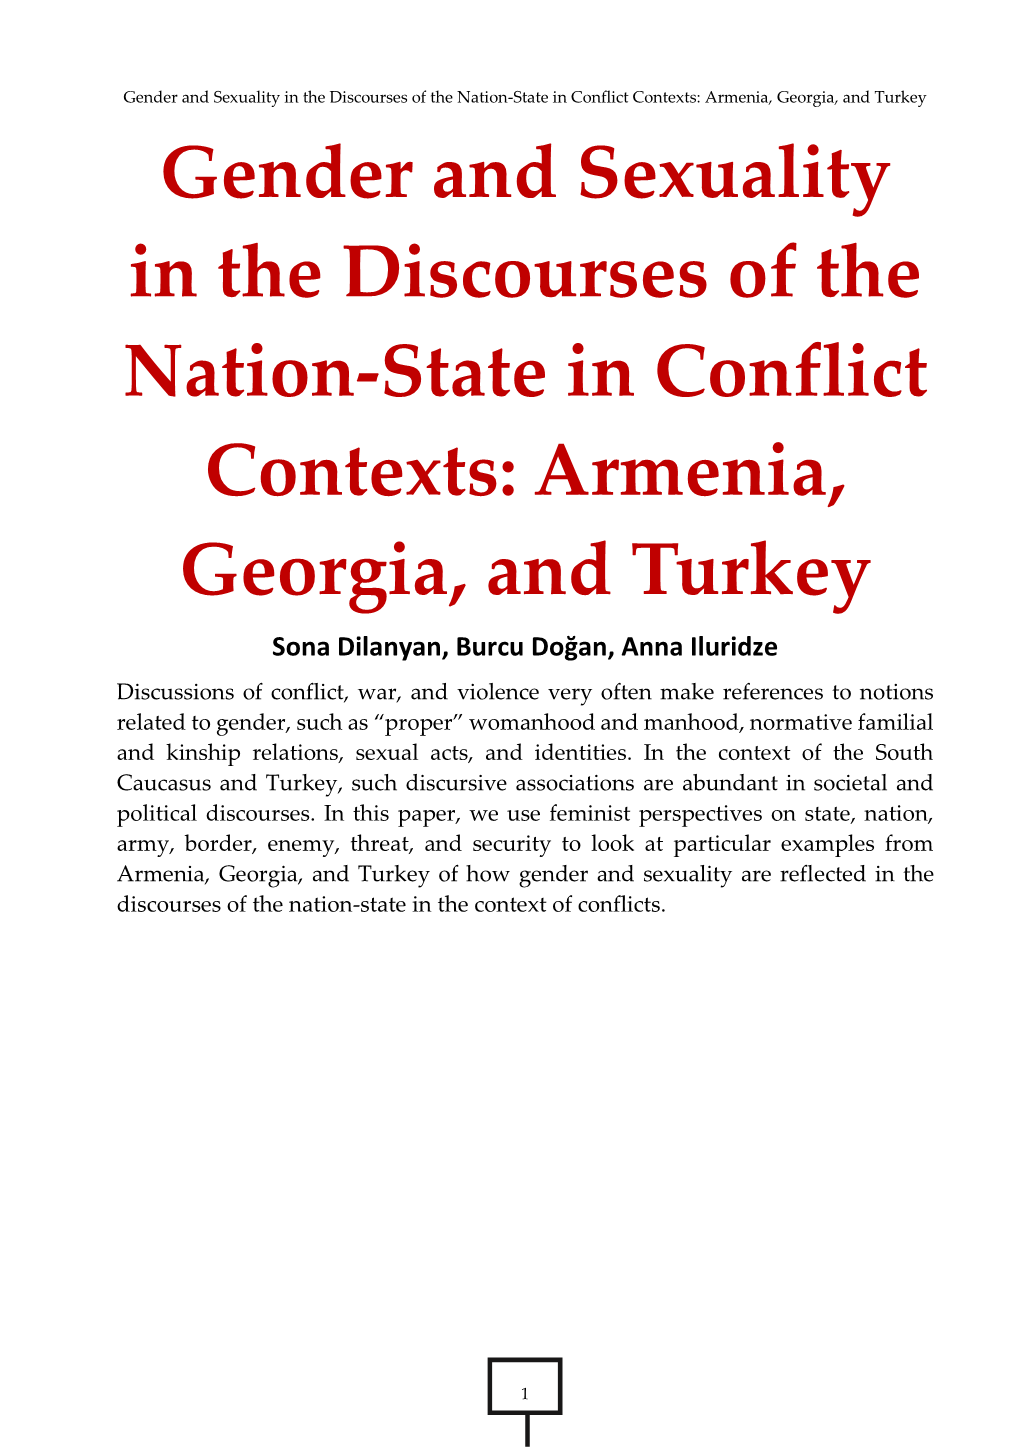 Gender and Sexuality in the Discourses of the Nation-State In